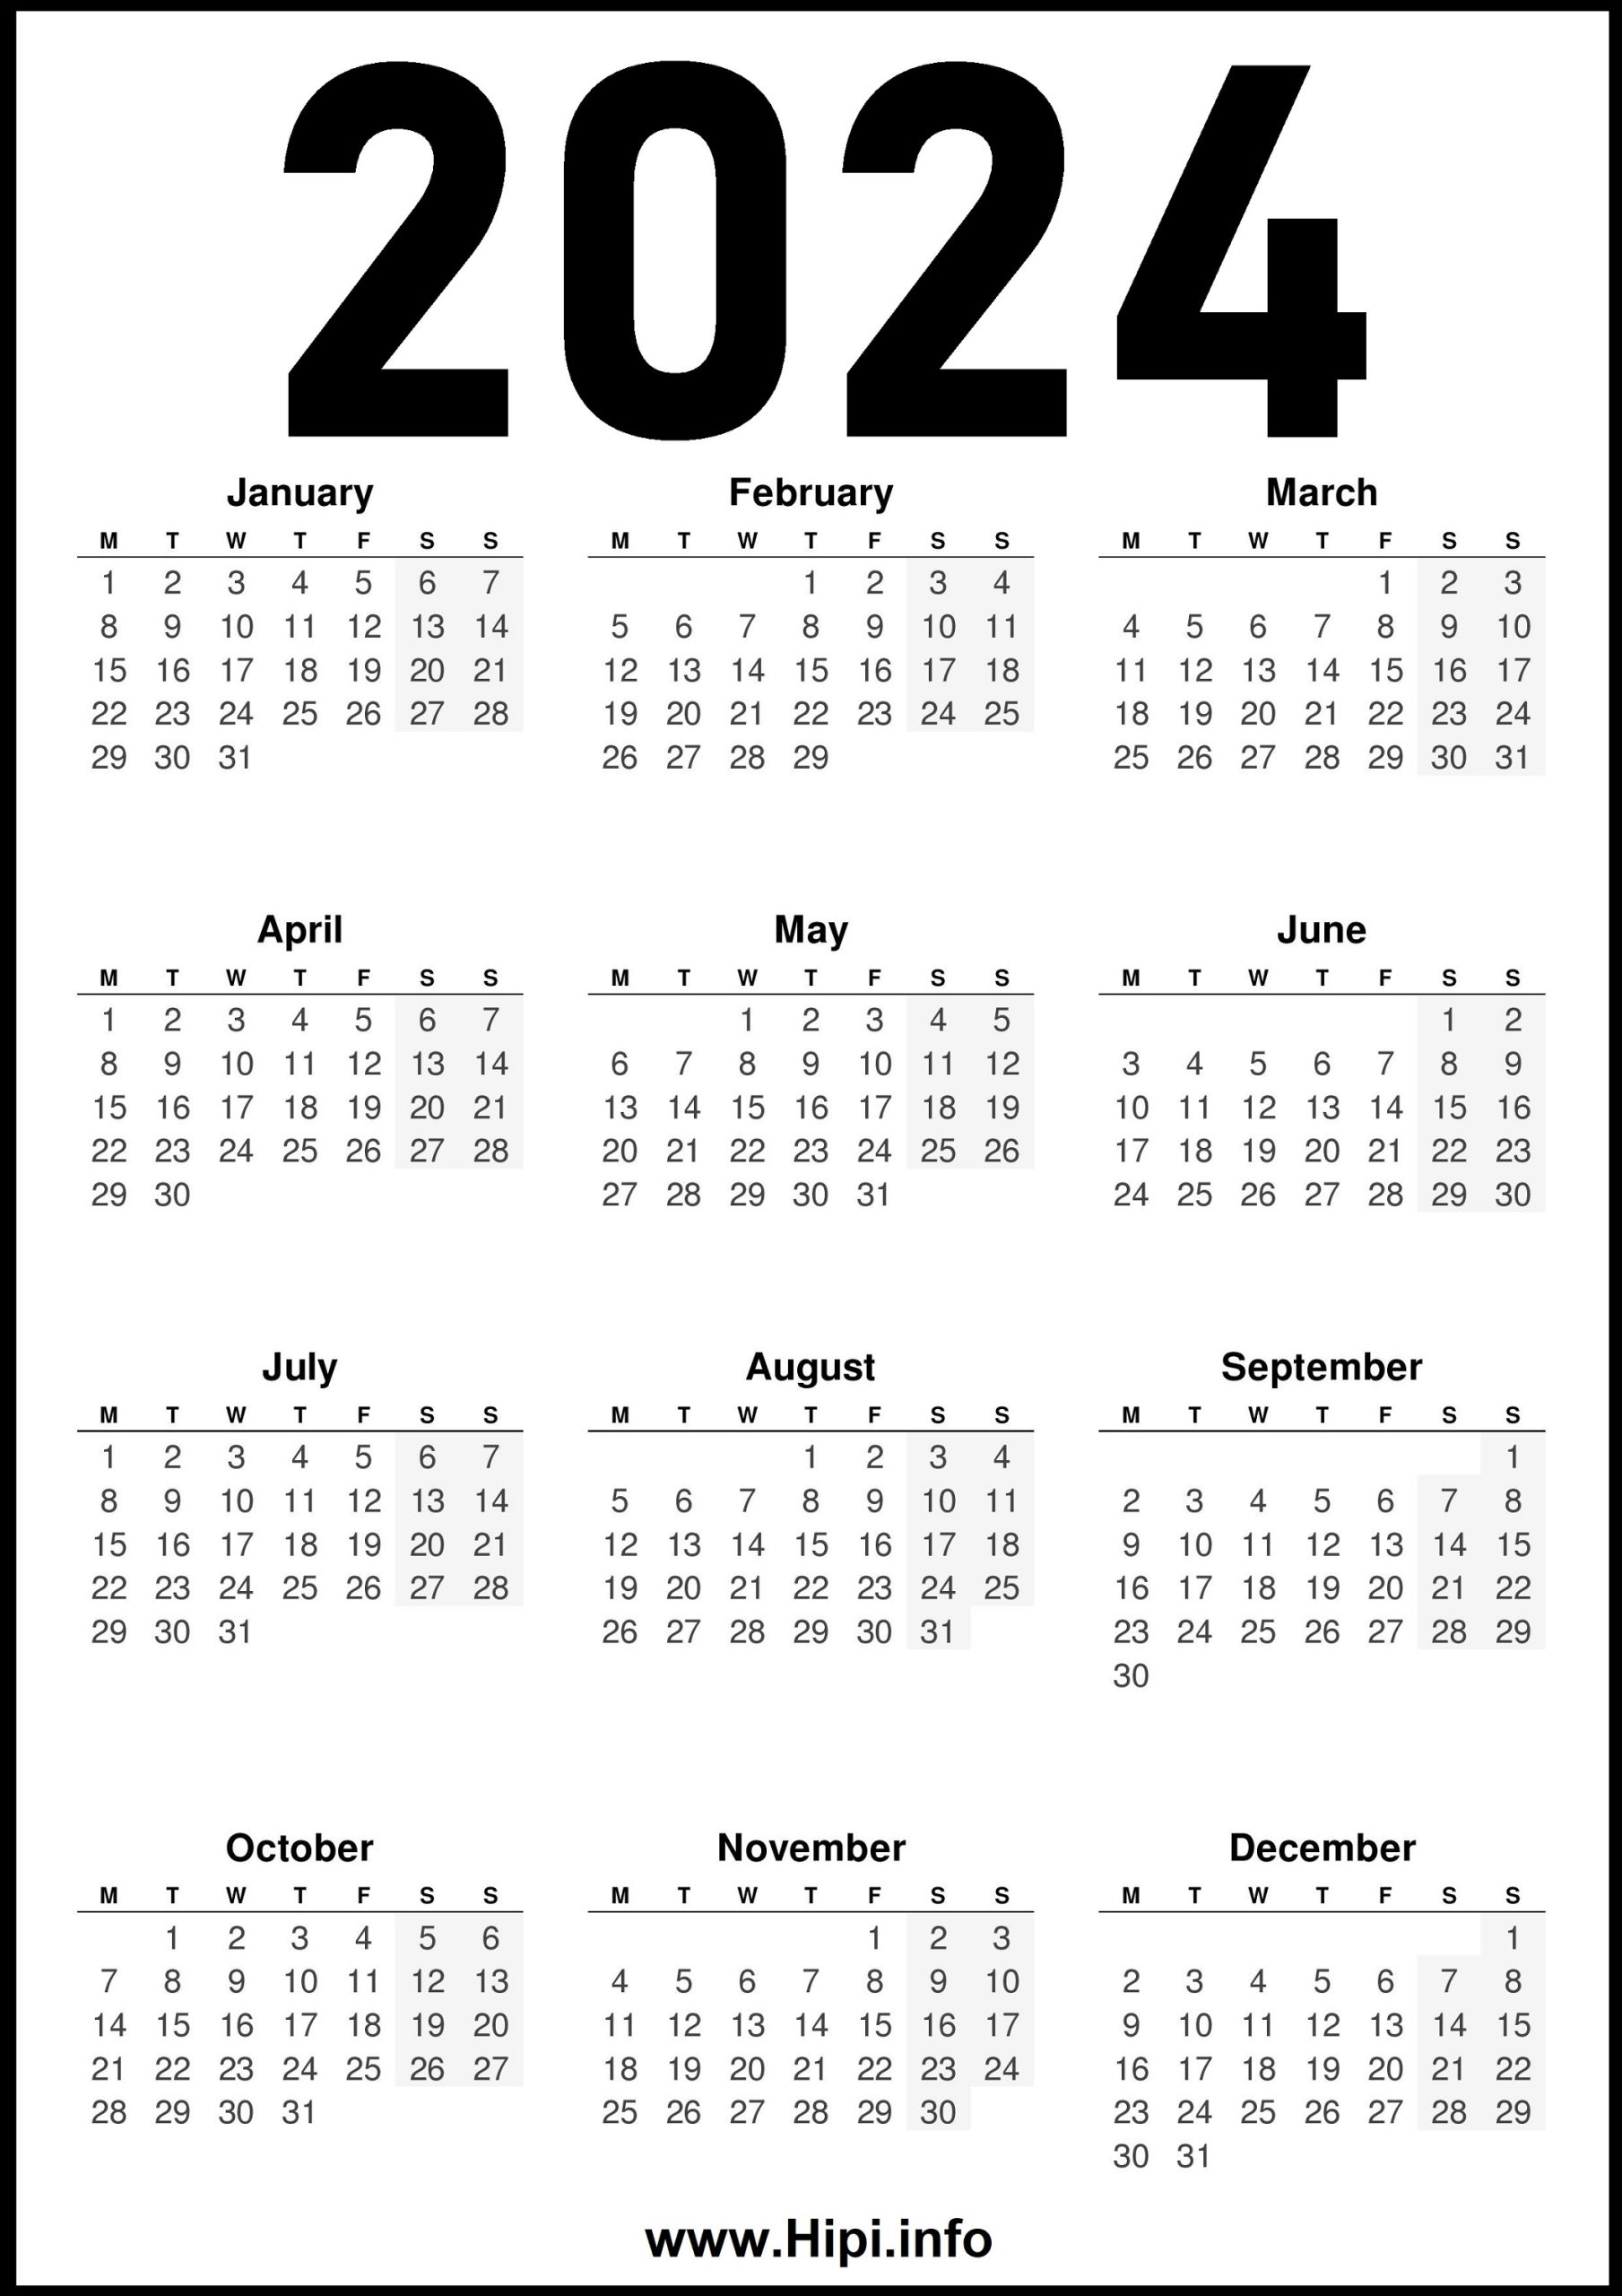 2024-calendars-archives-page-14-of-17-hipi-info-calendars